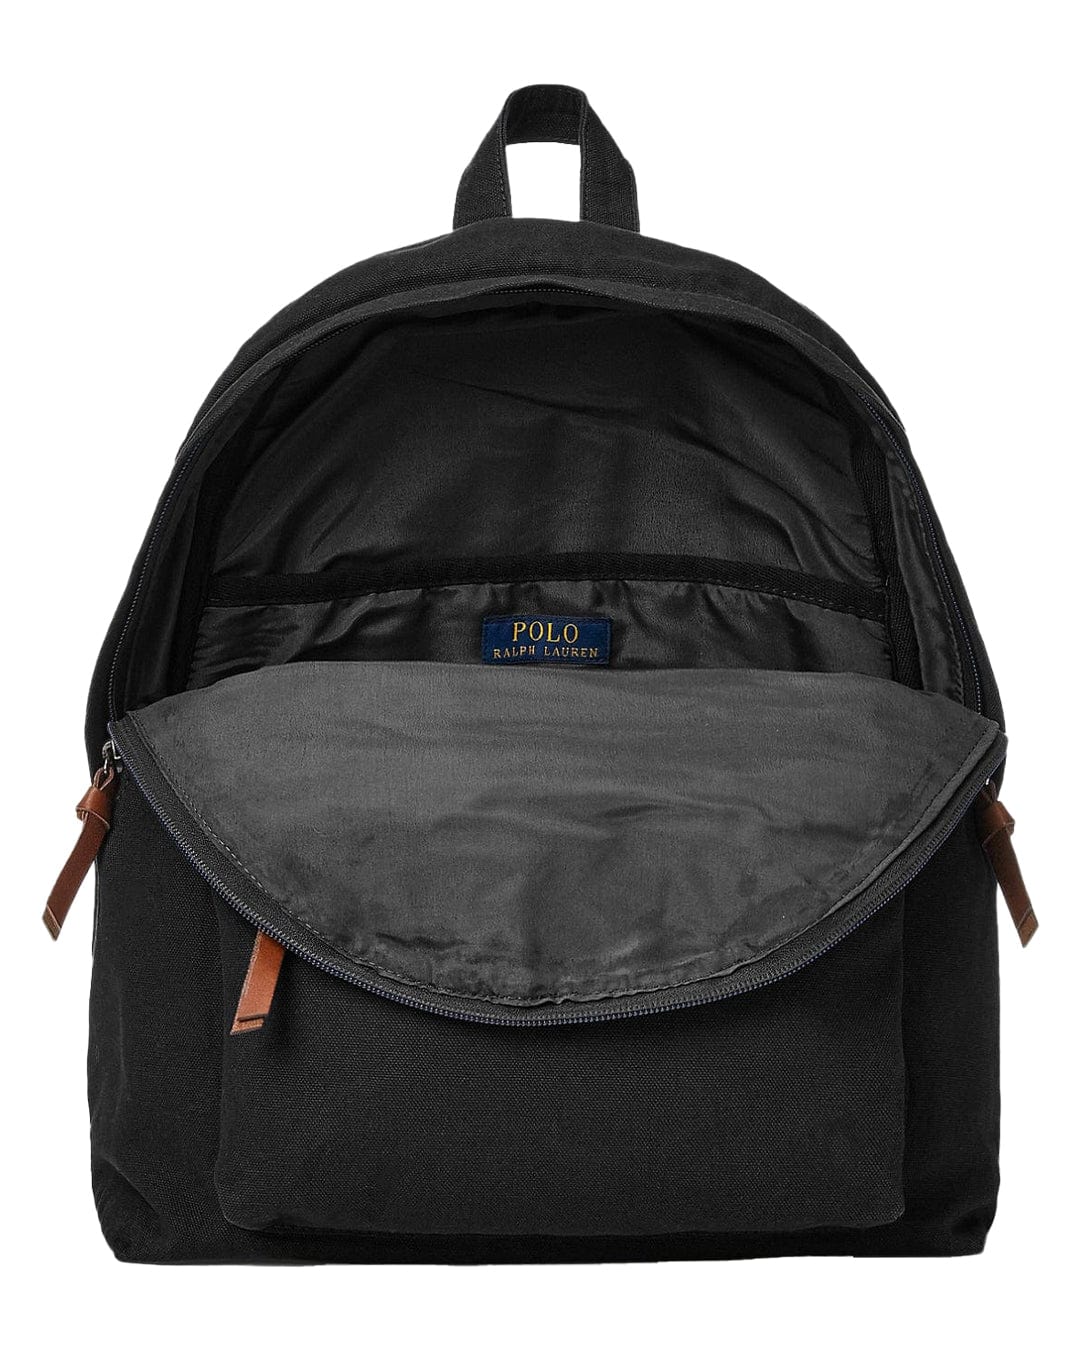 Polo Ralph Lauren Bags ONE SIZE Polo Ralph Lauren Black And Leather Backpack